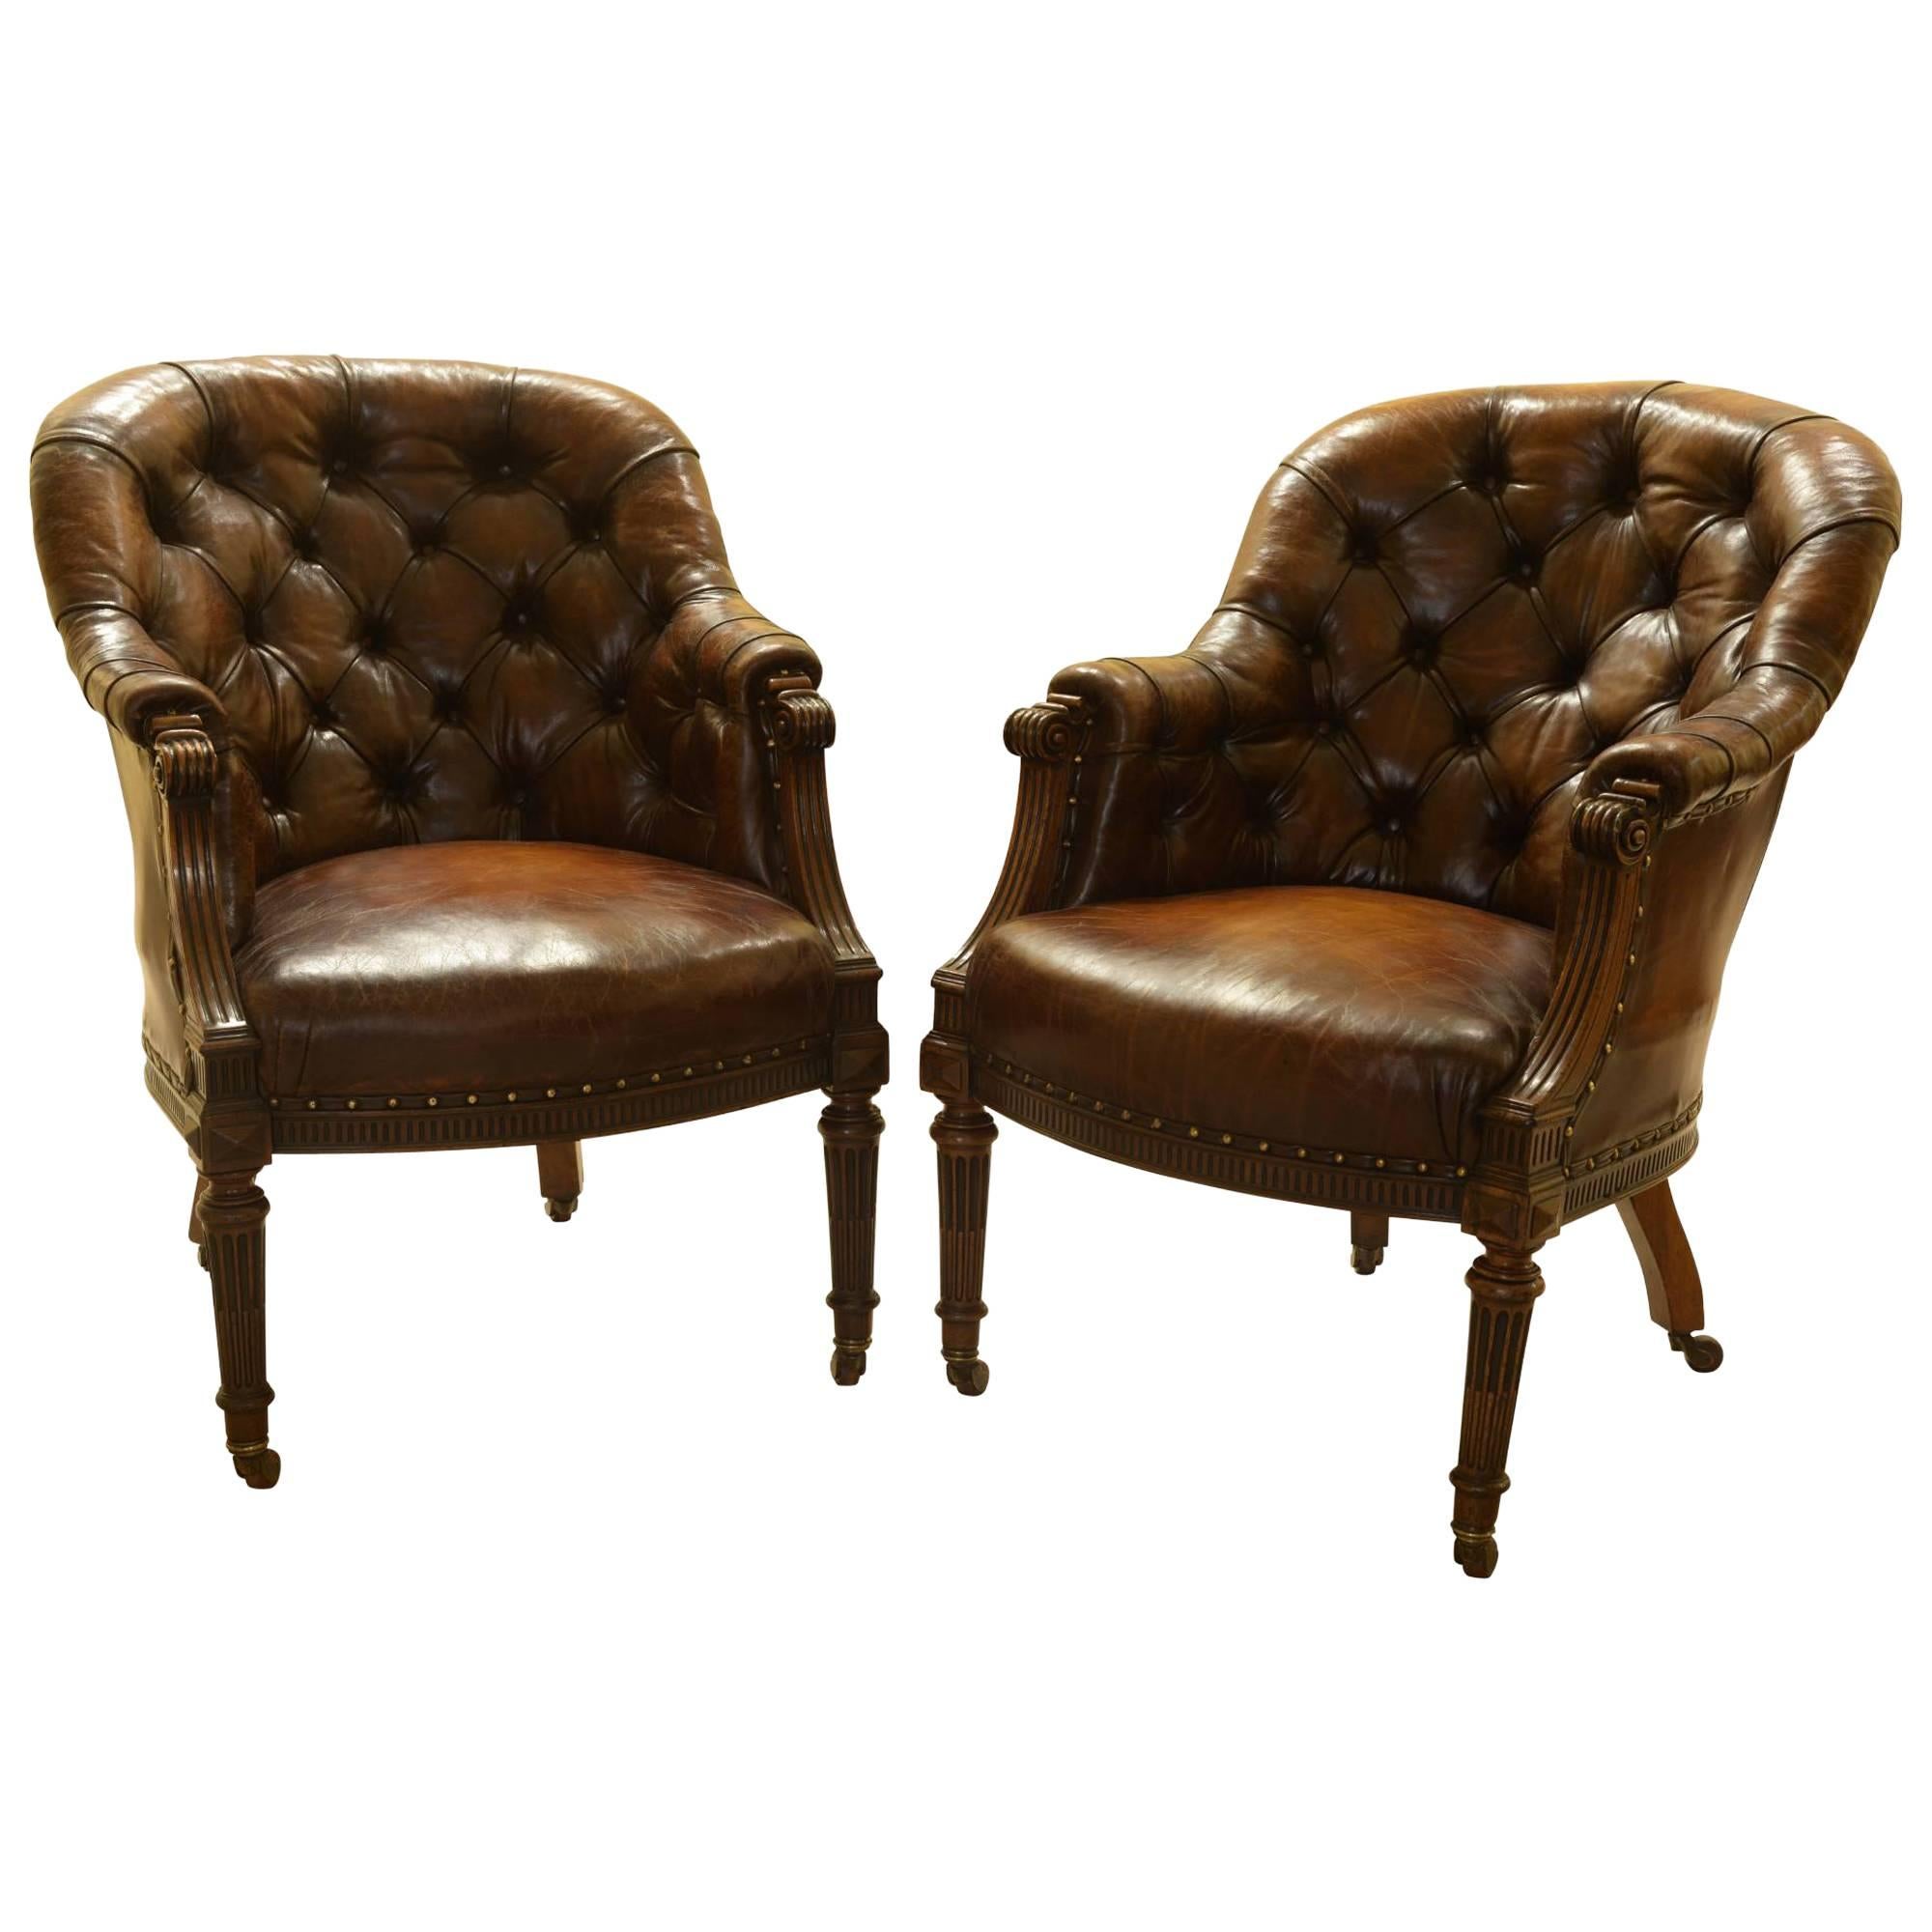 Pair of Regency Mahogany Leather Liberty Chairs